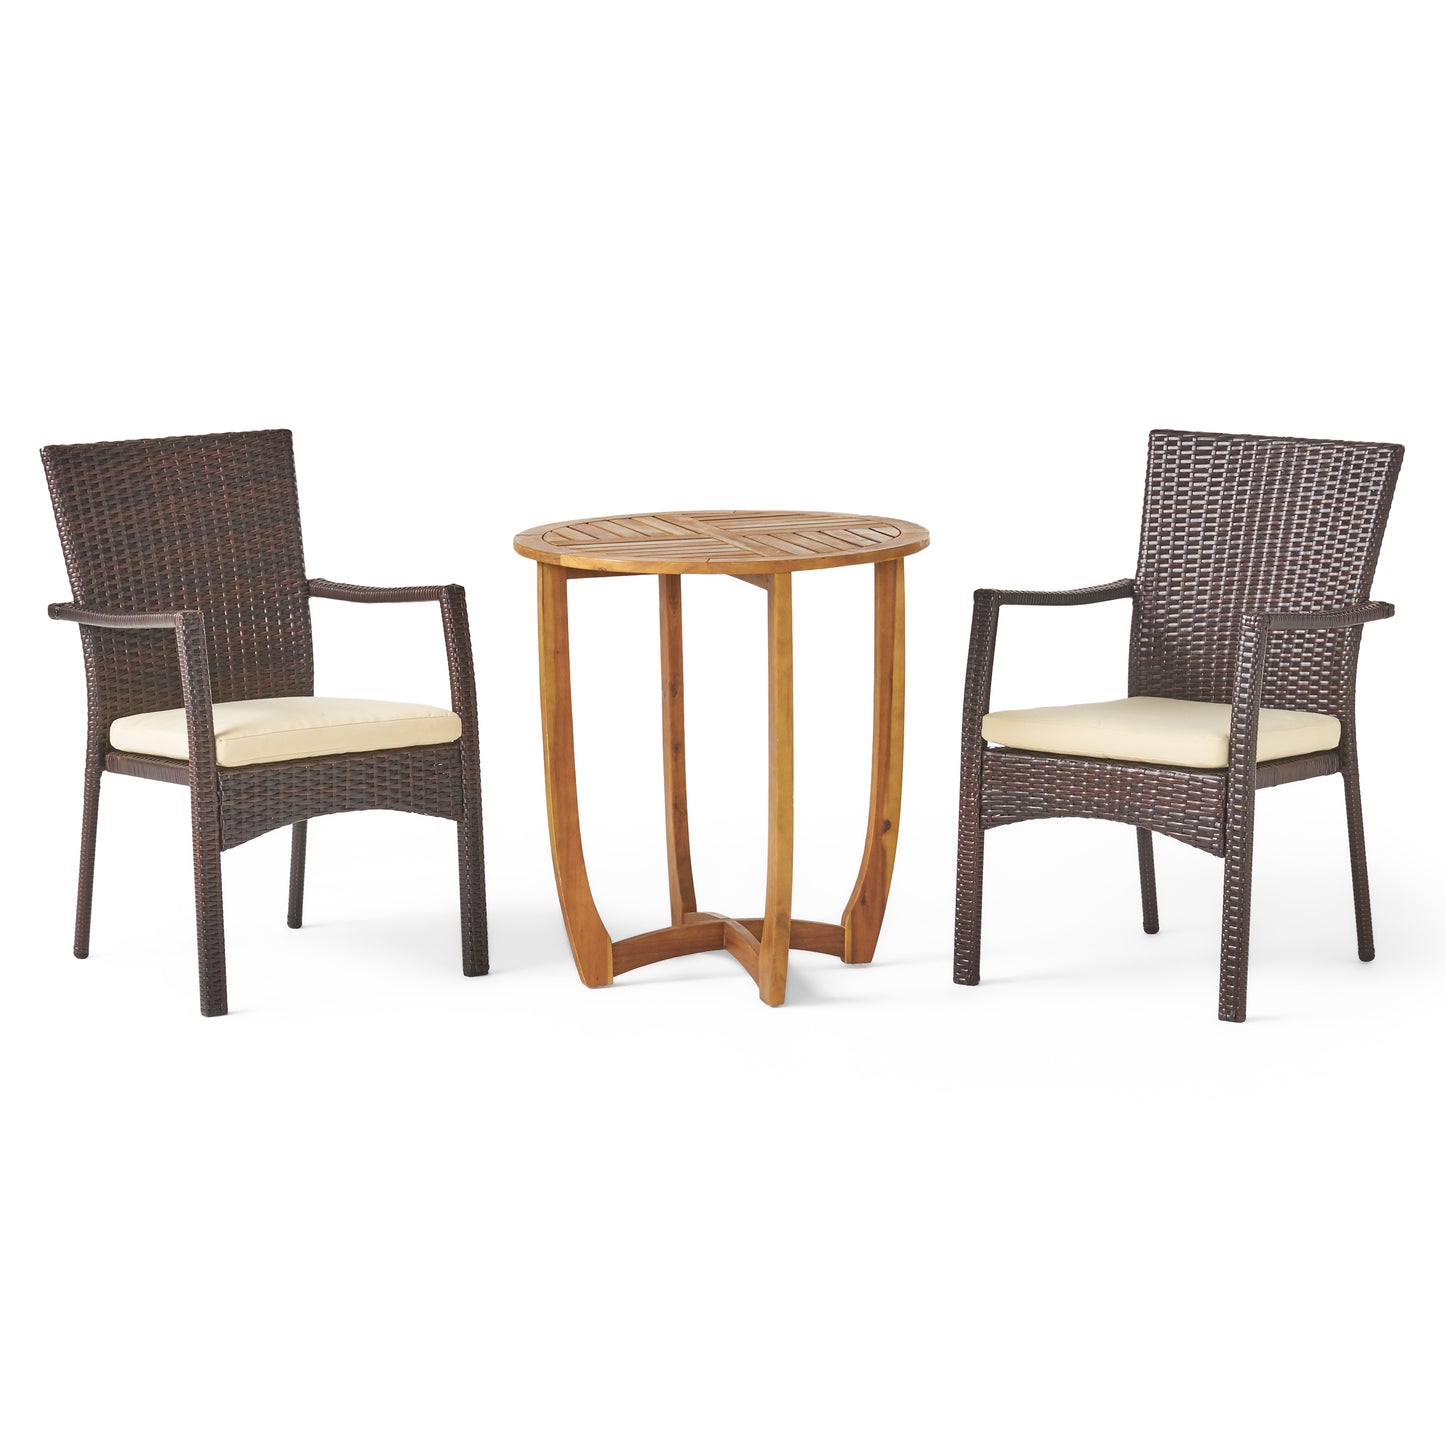 Leyam Outdoor 3 Piece Acacia Wood/ Wicker Bistro Set with Cushions, Teak Finish and Brown with Crème